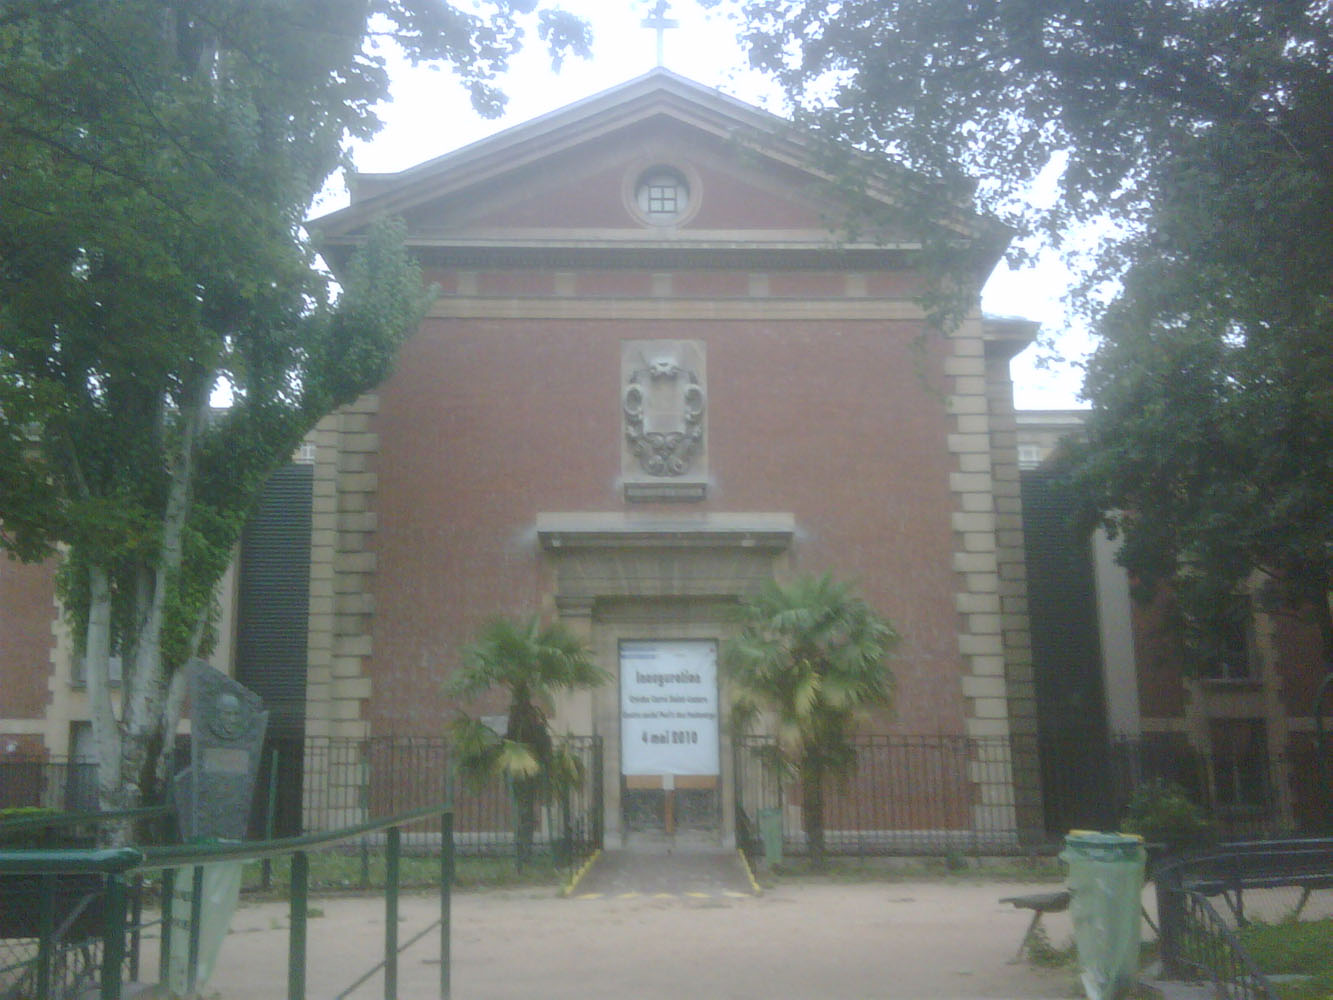 Prison Saint-Lazare, chapel, insert of coat-of-arms over the entrance.